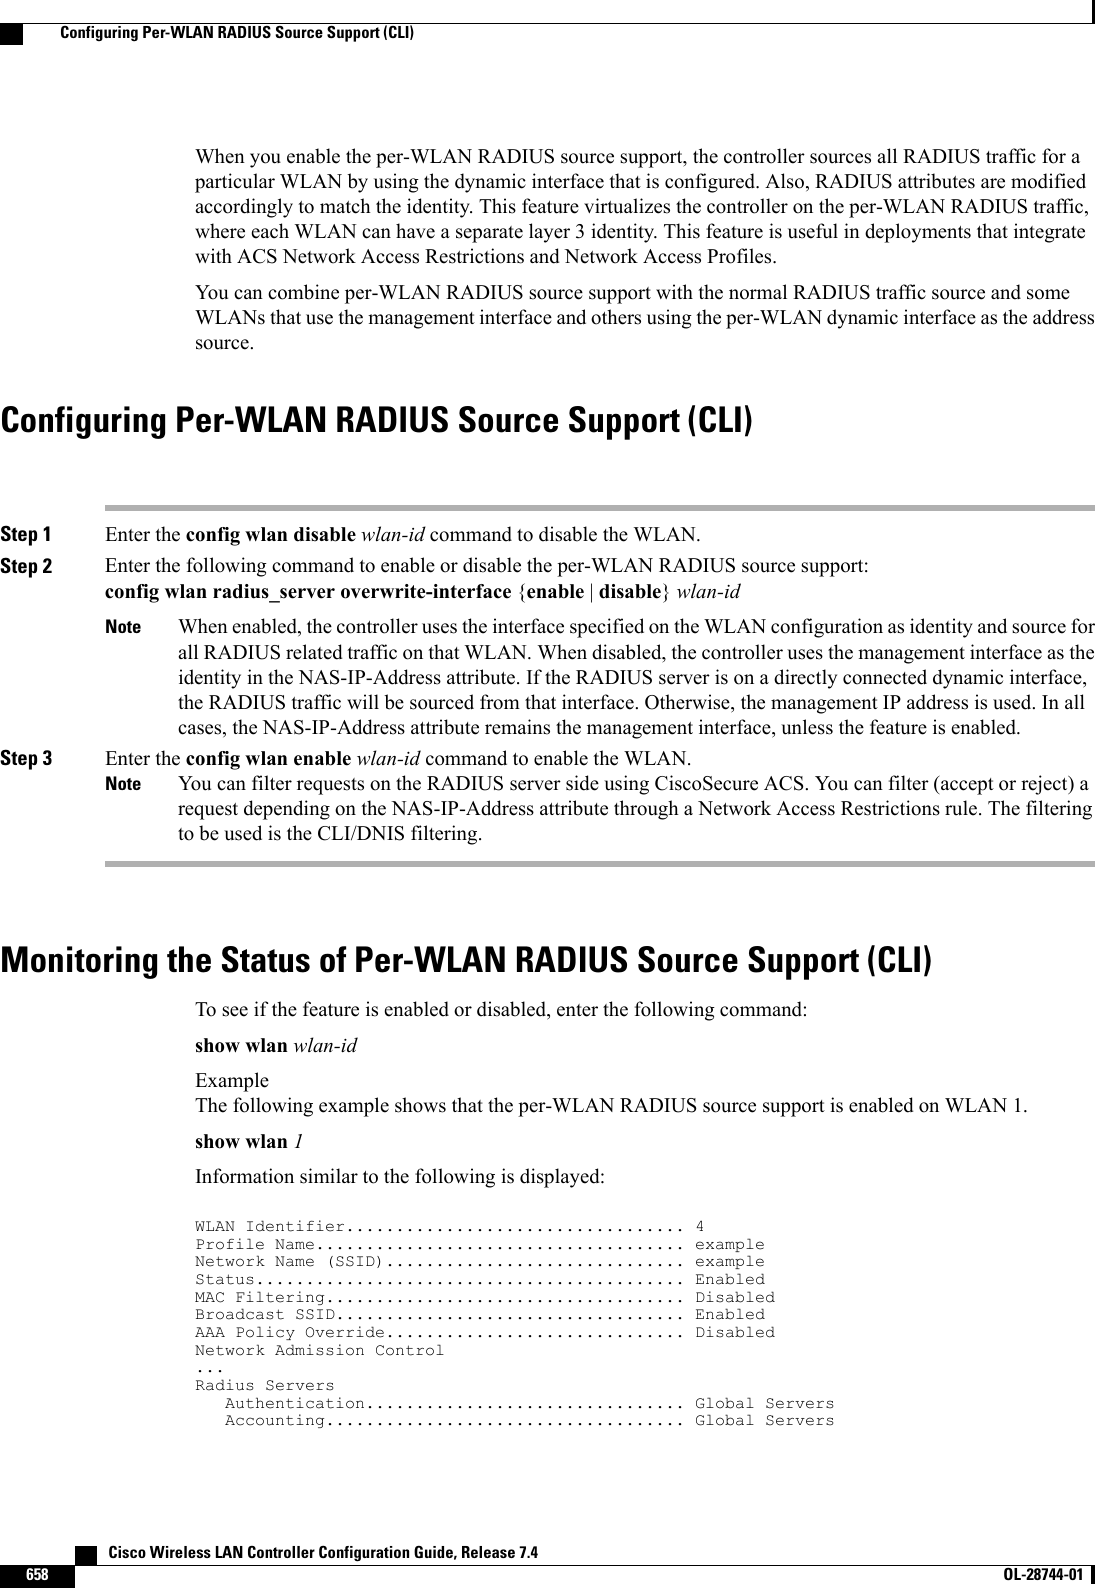 When you enable the per-WLAN RADIUS source support, the controller sources all RADIUS traffic for aparticular WLAN by using the dynamic interface that is configured. Also, RADIUS attributes are modifiedaccordingly to match the identity. This feature virtualizes the controller on the per-WLAN RADIUS traffic,where each WLAN can have a separate layer 3 identity. This feature is useful in deployments that integratewith ACS Network Access Restrictions and Network Access Profiles.You can combine per-WLAN RADIUS source support with the normal RADIUS traffic source and someWLANs that use the management interface and others using the per-WLAN dynamic interface as the addresssource.Configuring Per-WLAN RADIUS Source Support (CLI)Step 1 Enter the config wlan disable wlan-id command to disable the WLAN.Step 2 Enter the following command to enable or disable the per-WLAN RADIUS source support:config wlan radius_server overwrite-interface {enable |disable}wlan-idWhen enabled, the controller uses the interface specified on the WLAN configuration as identity and source forall RADIUS related traffic on that WLAN. When disabled, the controller uses the management interface as theidentity in the NAS-IP-Address attribute. If the RADIUS server is on a directly connected dynamic interface,the RADIUS traffic will be sourced from that interface. Otherwise, the management IP address is used. In allcases, the NAS-IP-Address attribute remains the management interface, unless the feature is enabled.NoteStep 3 Enter the config wlan enable wlan-id command to enable the WLAN.You can filter requests on the RADIUS server side using CiscoSecure ACS. You can filter (accept or reject) arequest depending on the NAS-IP-Address attribute through a Network Access Restrictions rule. The filteringto be used is the CLI/DNIS filtering.NoteMonitoring the Status of Per-WLAN RADIUS Source Support (CLI)To see if the feature is enabled or disabled, enter the following command:show wlan wlan-idExampleThe following example shows that the per-WLAN RADIUS source support is enabled on WLAN 1.show wlan 1Information similar to the following is displayed:WLAN Identifier.................................. 4Profile Name..................................... exampleNetwork Name (SSID).............................. exampleStatus........................................... EnabledMAC Filtering.................................... DisabledBroadcast SSID................................... EnabledAAA Policy Override.............................. DisabledNetwork Admission Control...Radius ServersAuthentication................................ Global ServersAccounting.................................... Global Servers   Cisco Wireless LAN Controller Configuration Guide, Release 7.4658 OL-28744-01  Configuring Per-WLAN RADIUS Source Support (CLI)